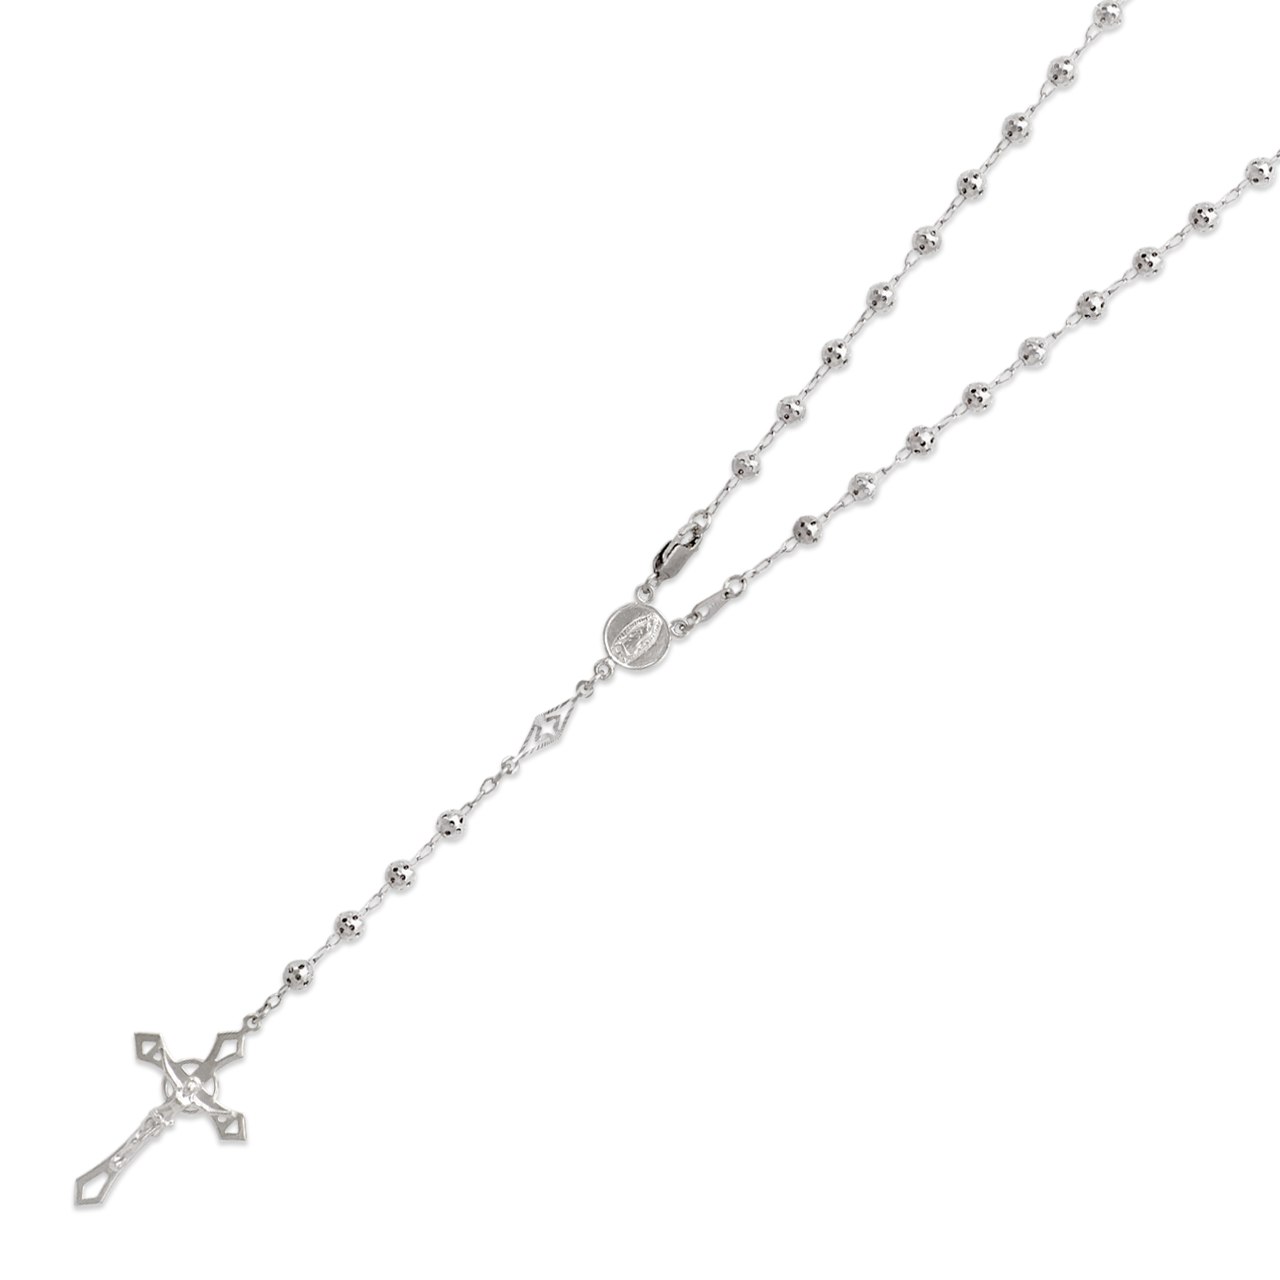 DoubleAccent 14K White Gold Chain Cross 4mm Perforated Bead Rosary Chain Necklace (24 Inches)